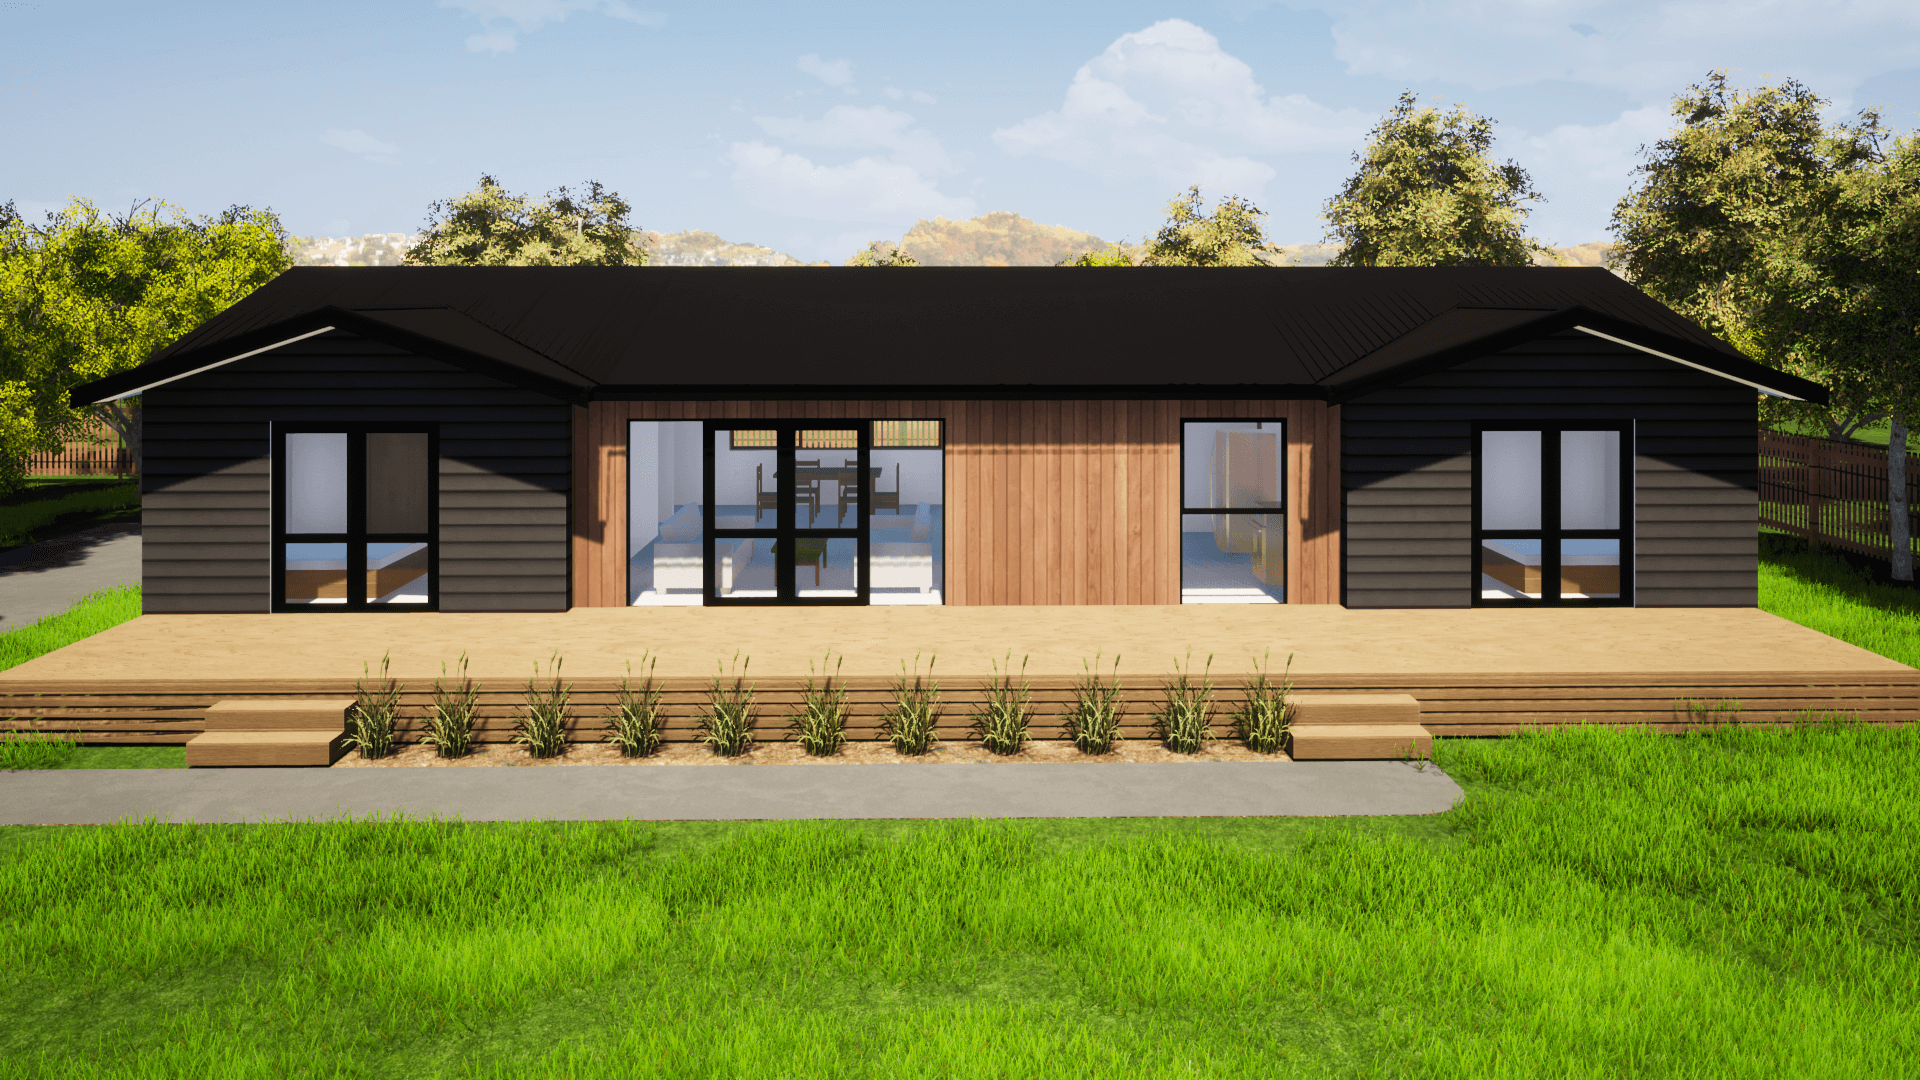 4 bedroom prefab house with large deck